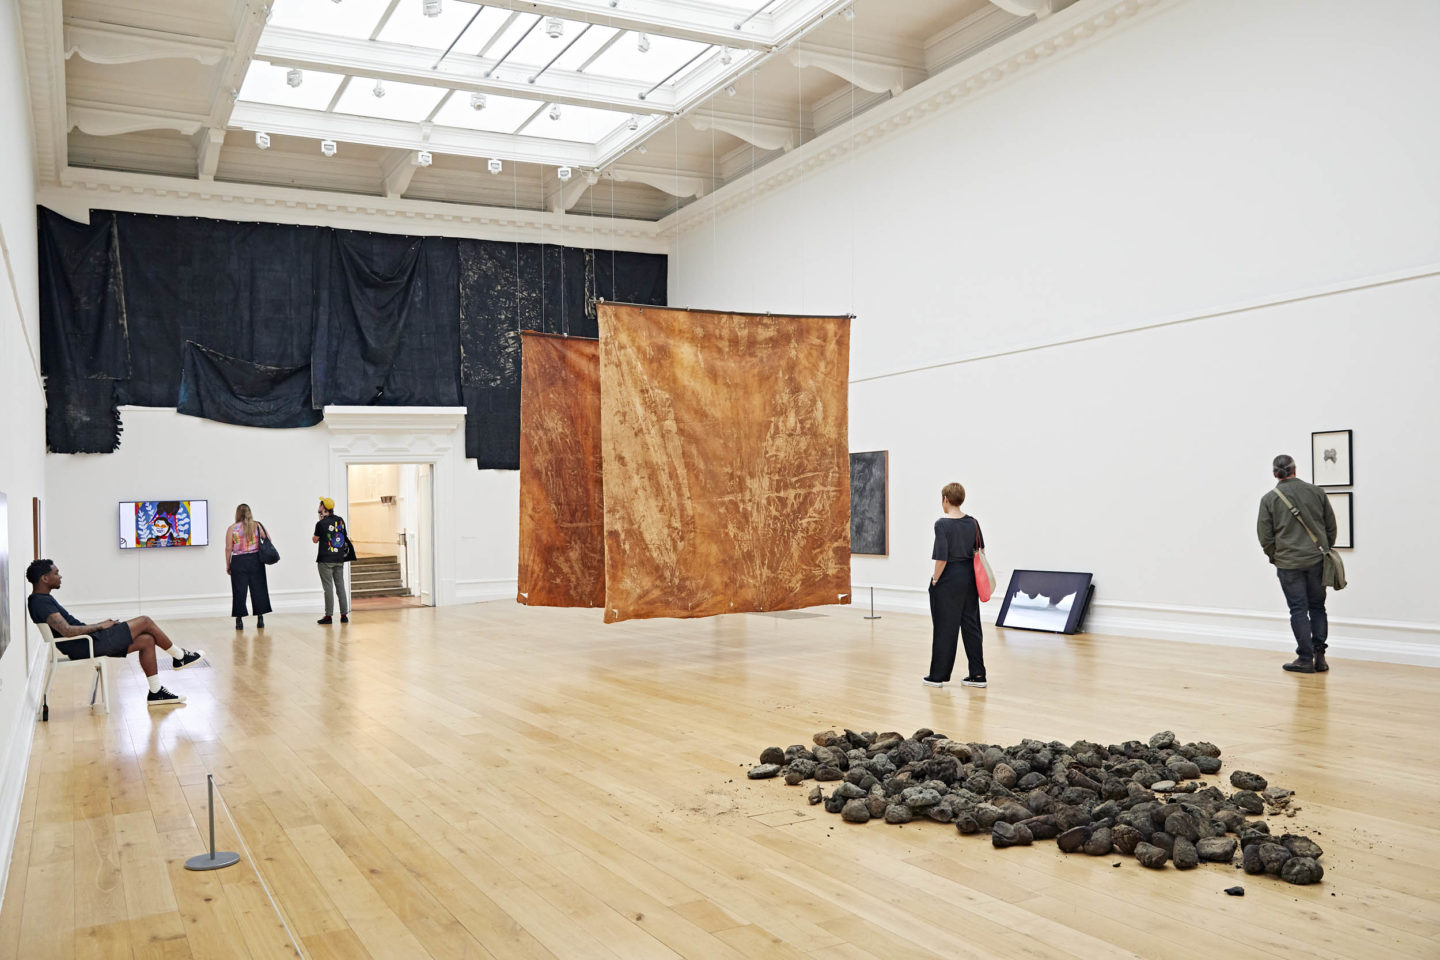 A photo of a large gallery space with multiple art installations. In the middle of the gallery, there are many rock structures are assembled together and there are two large orange drapes suspended from the air. There are also multiple pieces of art work that are framed and hung across the walls of the gallery and digital screens also by the walls of the gallery. Several visitors can be seen viewing the art work across the gallery space.